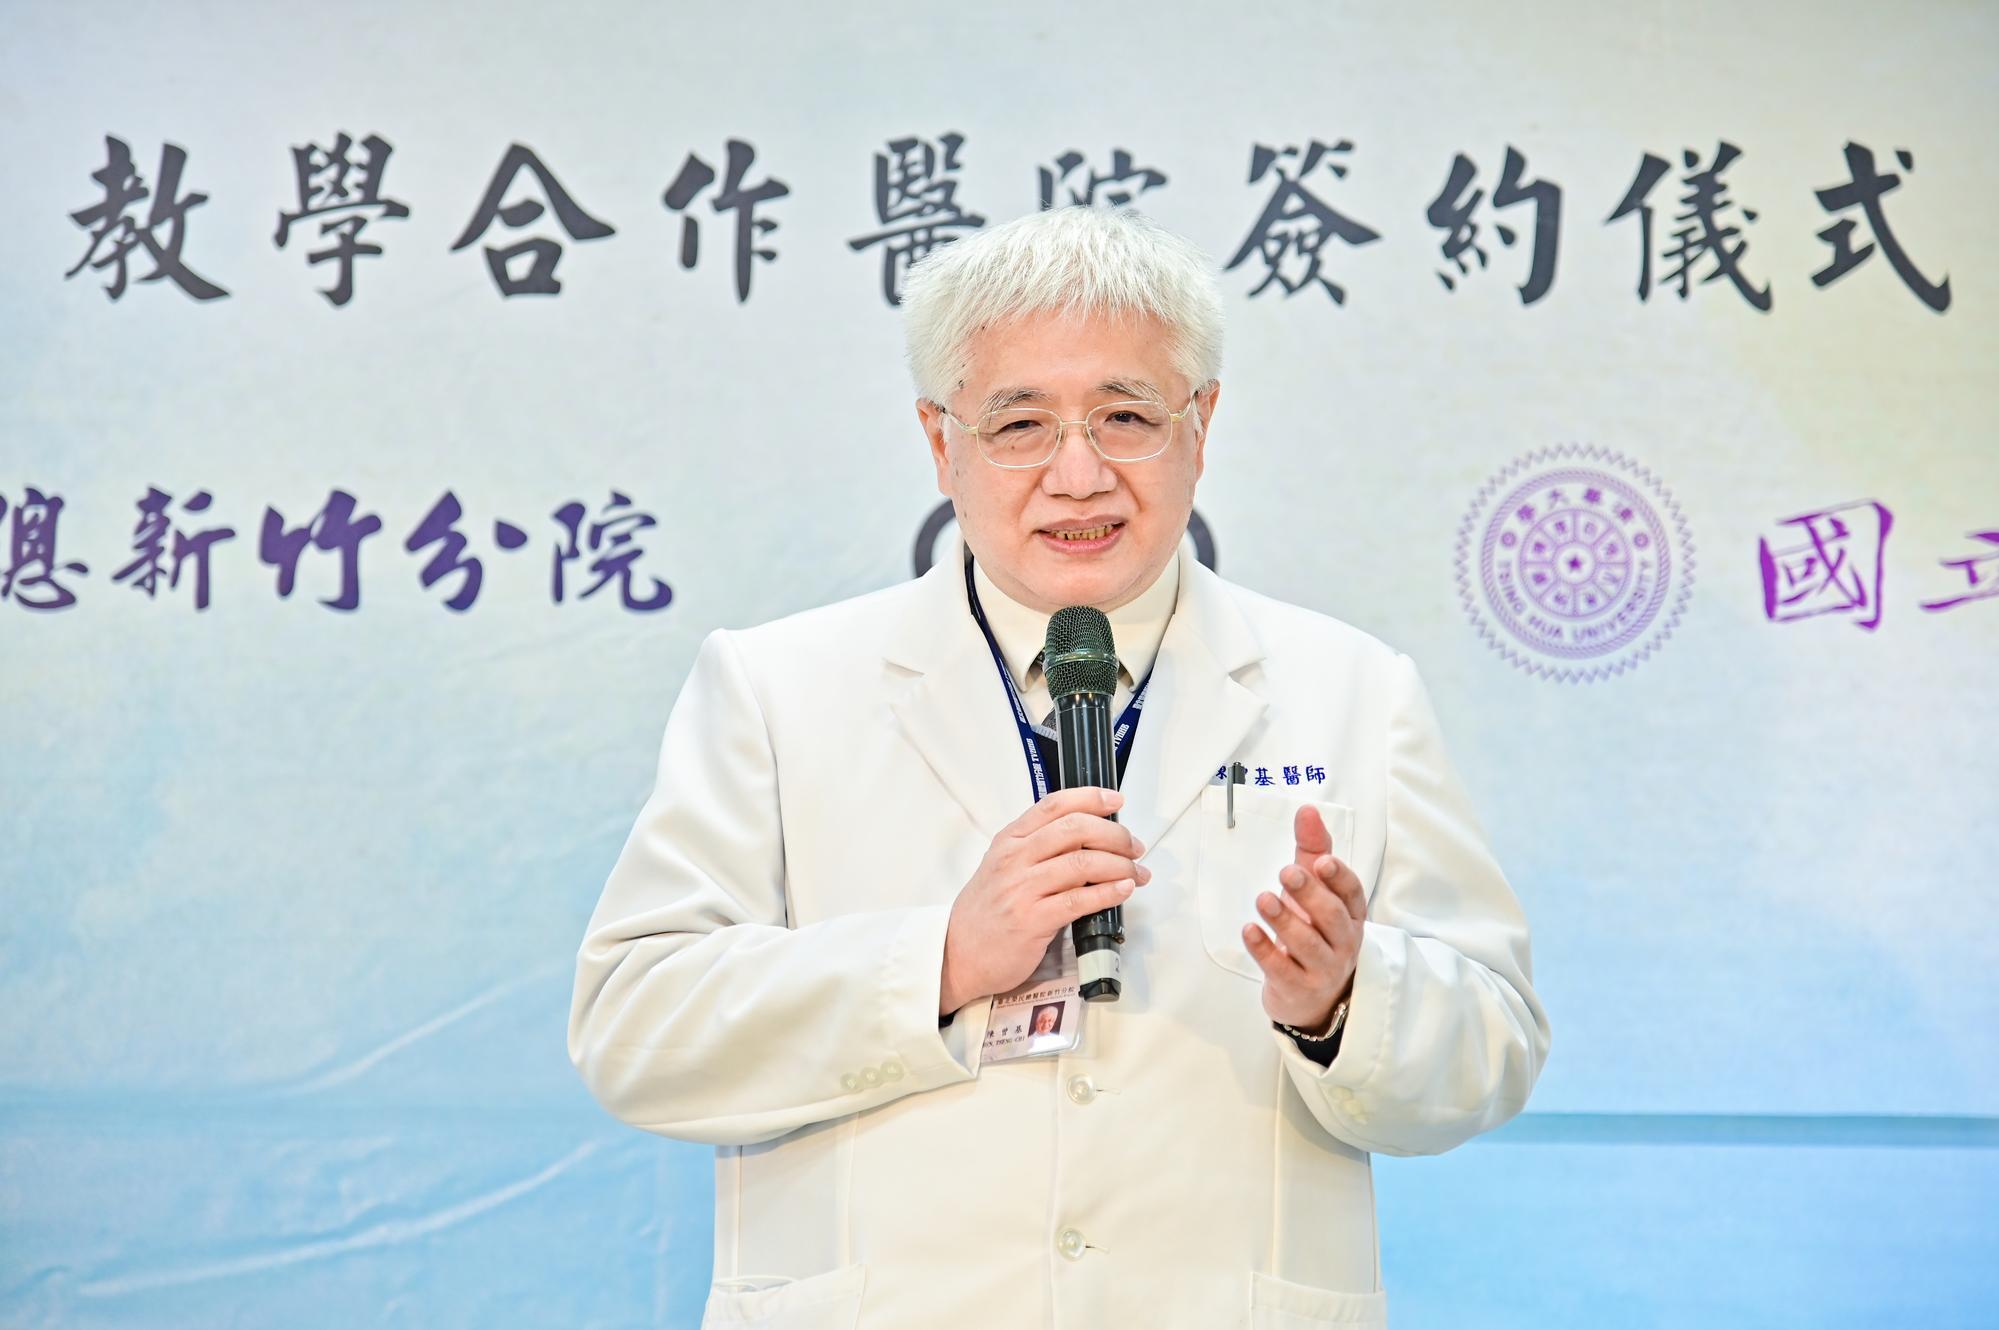 Chen Tzeng-ji said that among the 40 physicians of Western medicine at the Hsinchu TVGH, 25 have remained in rural areas.